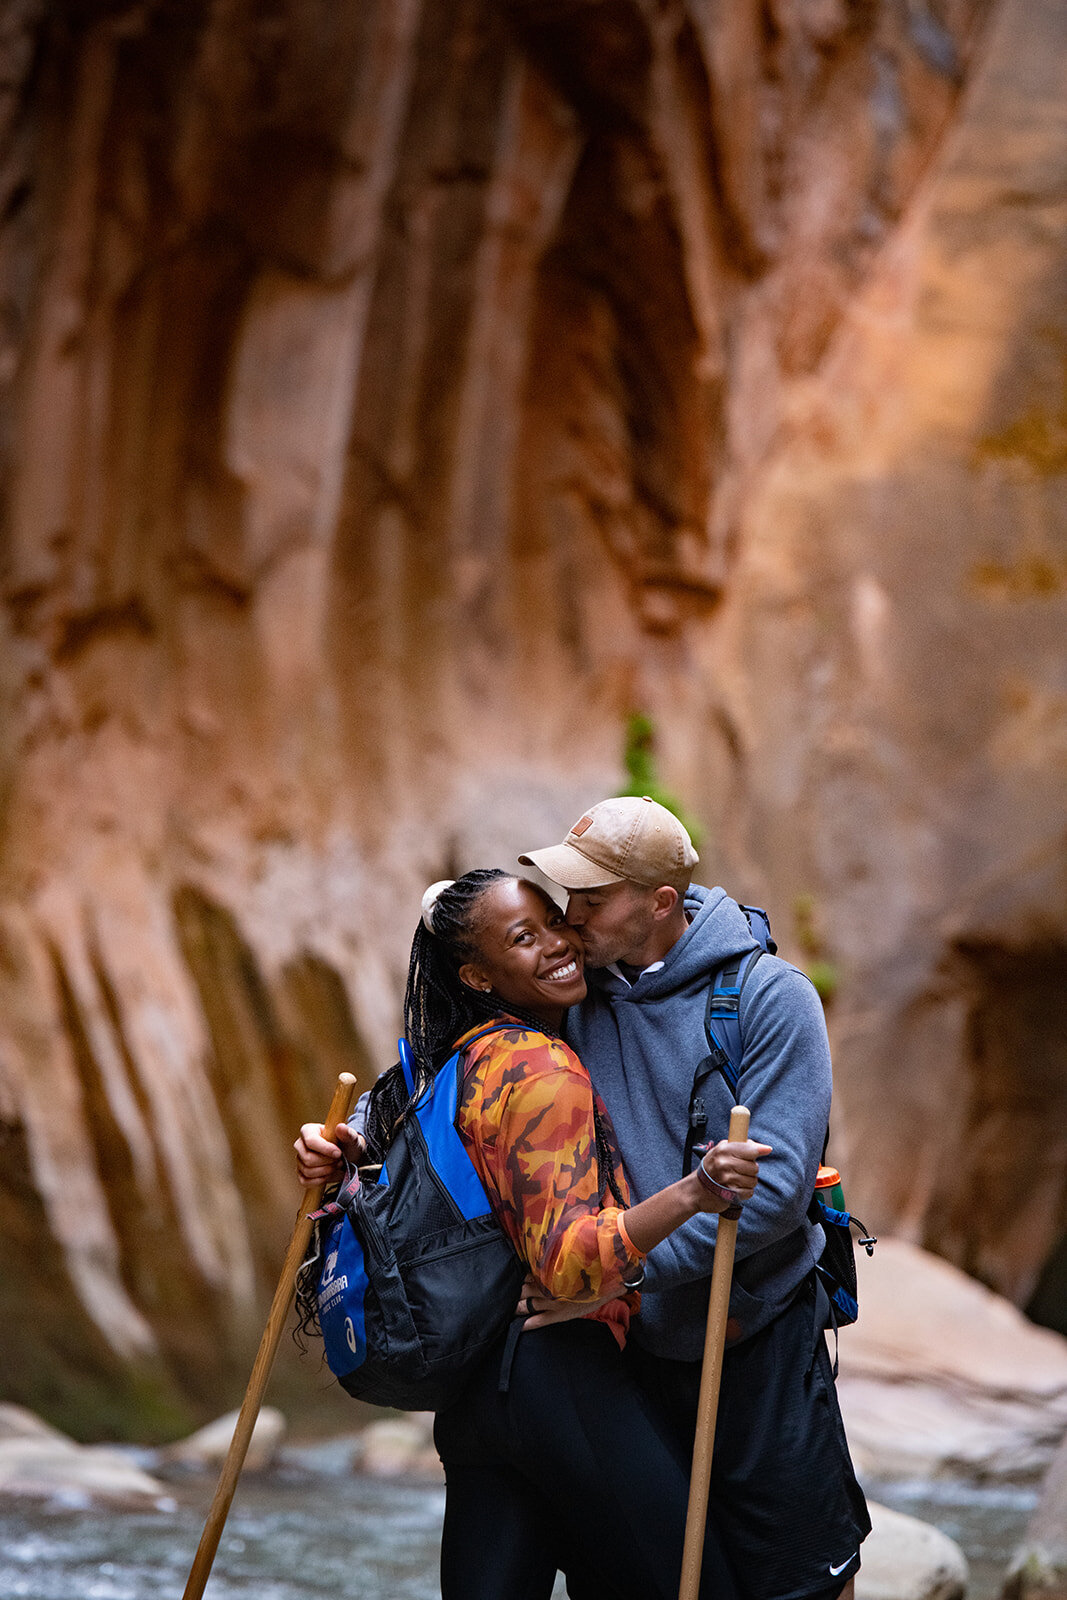 zion-national-park-engagement-photographer-wild-within-us (565)